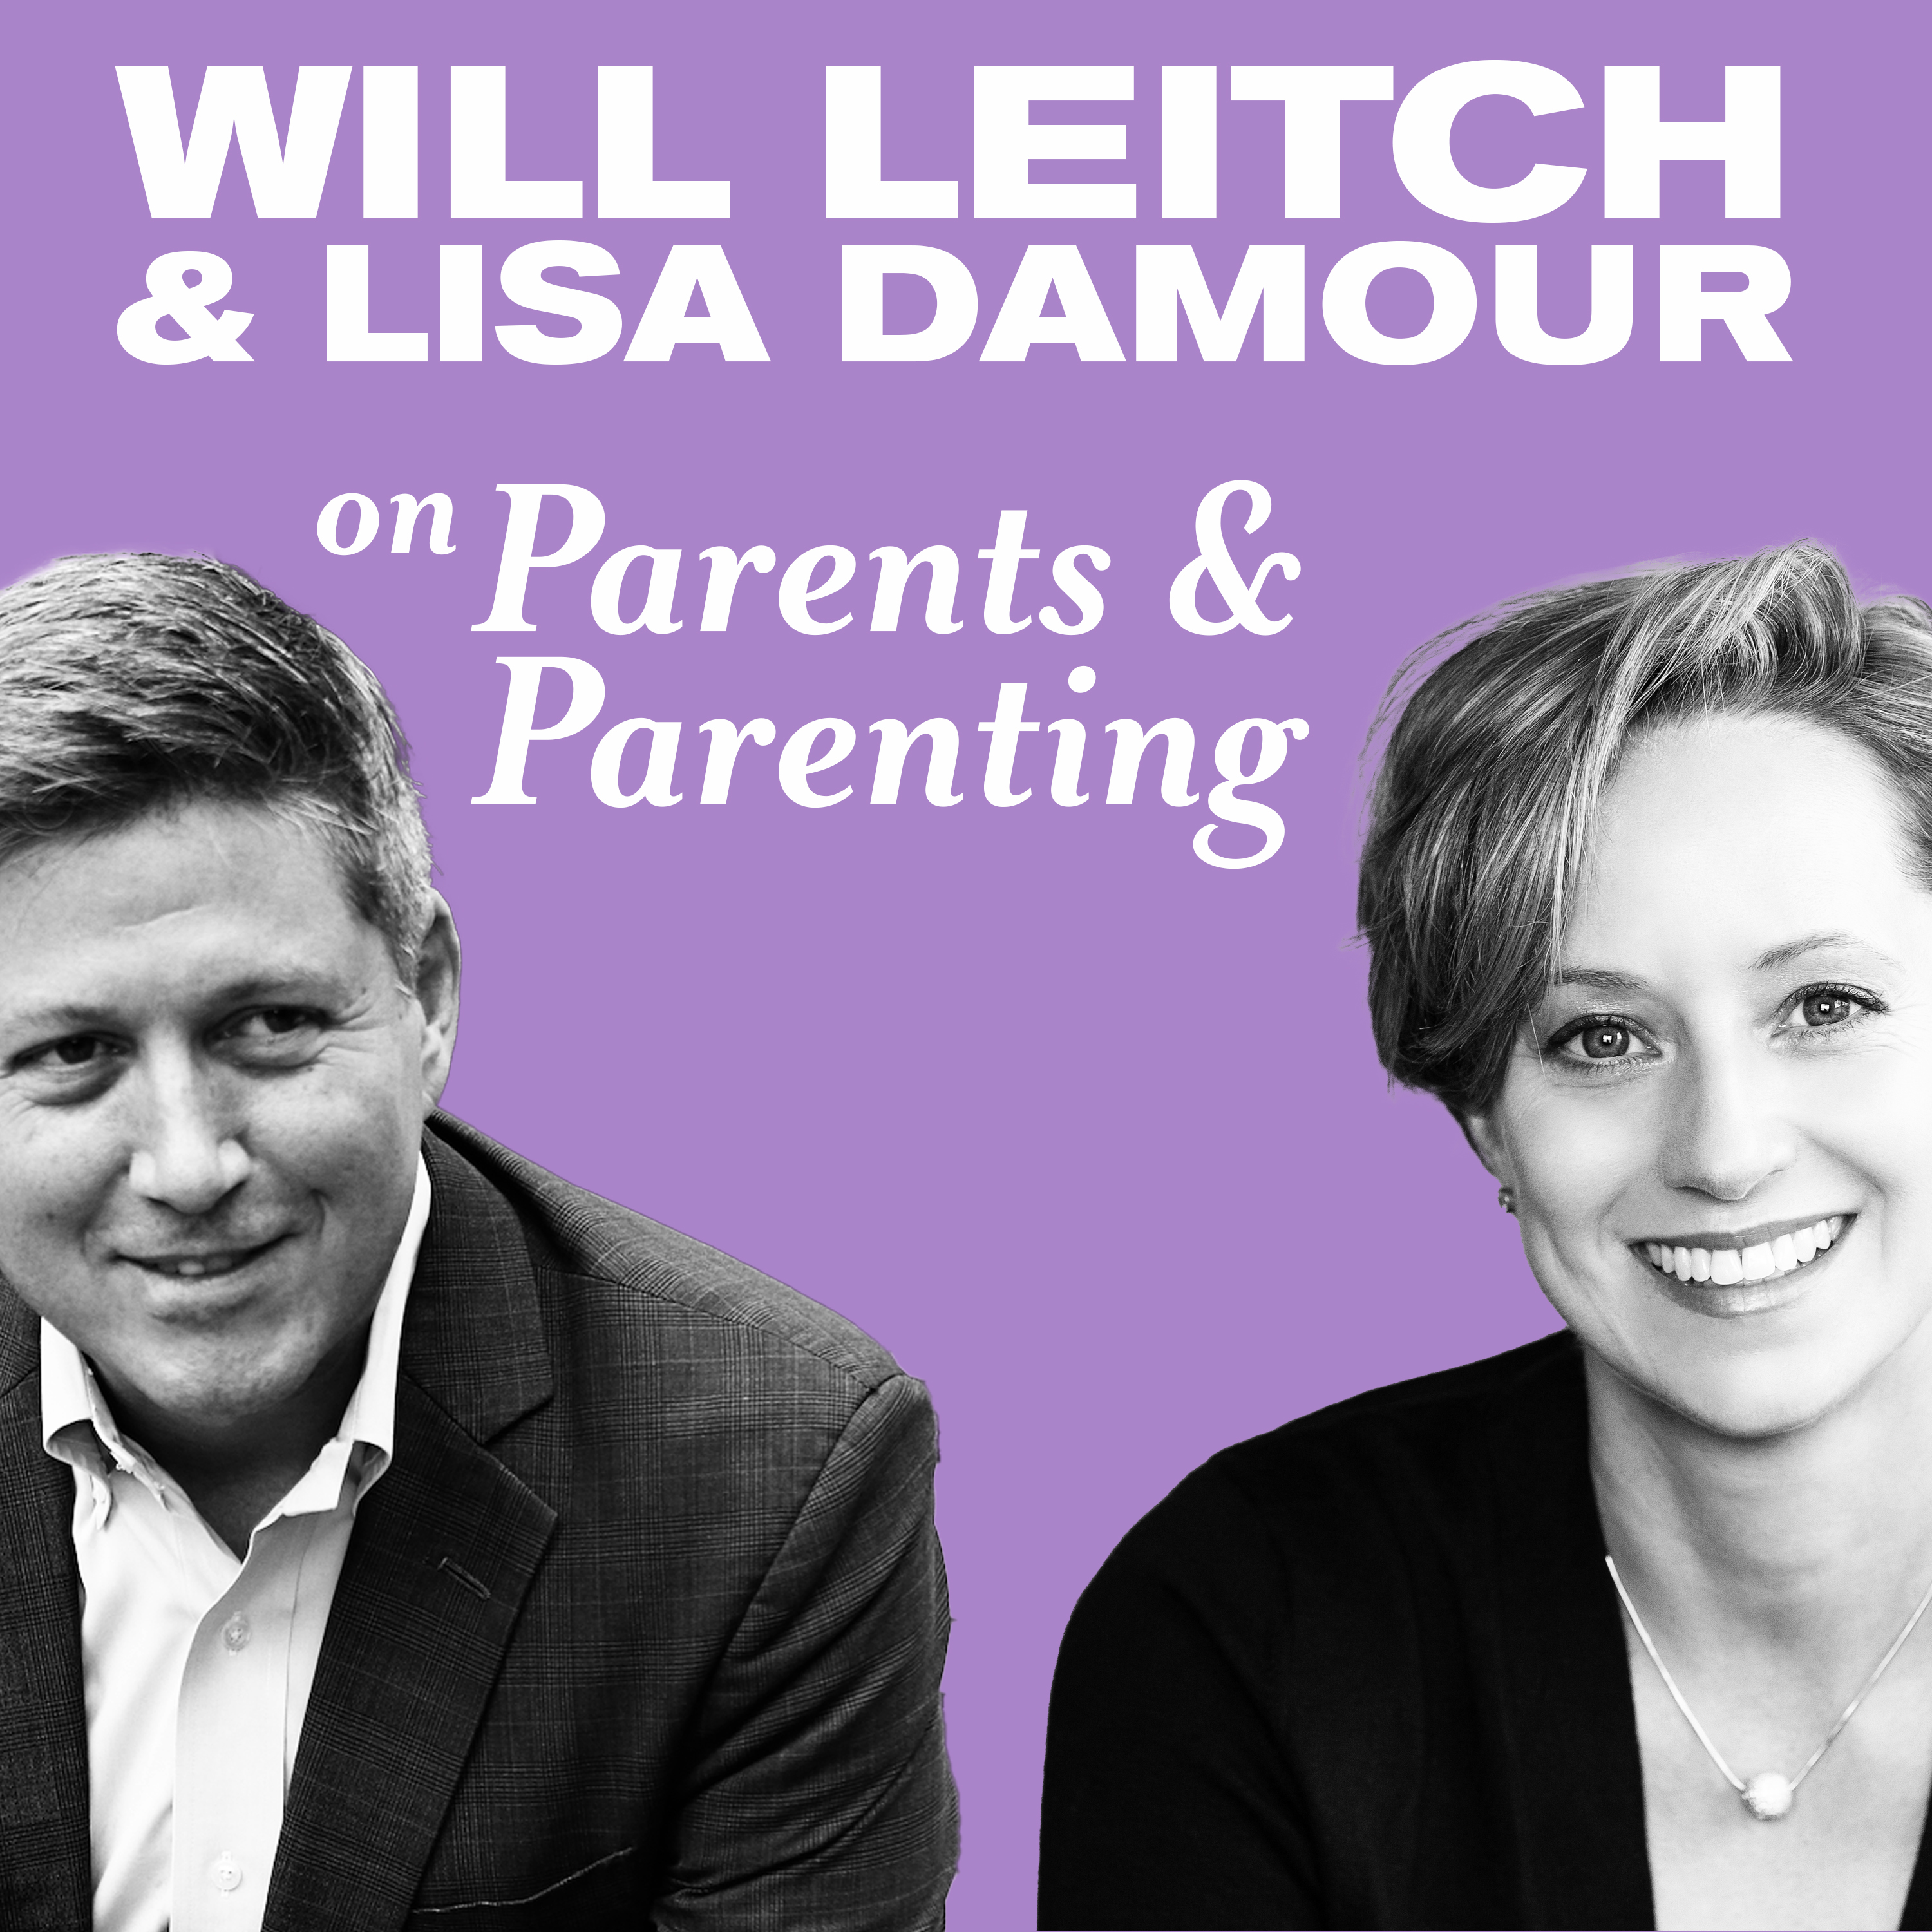 Lisa Damour and Will Leitch on Parents and Parenting